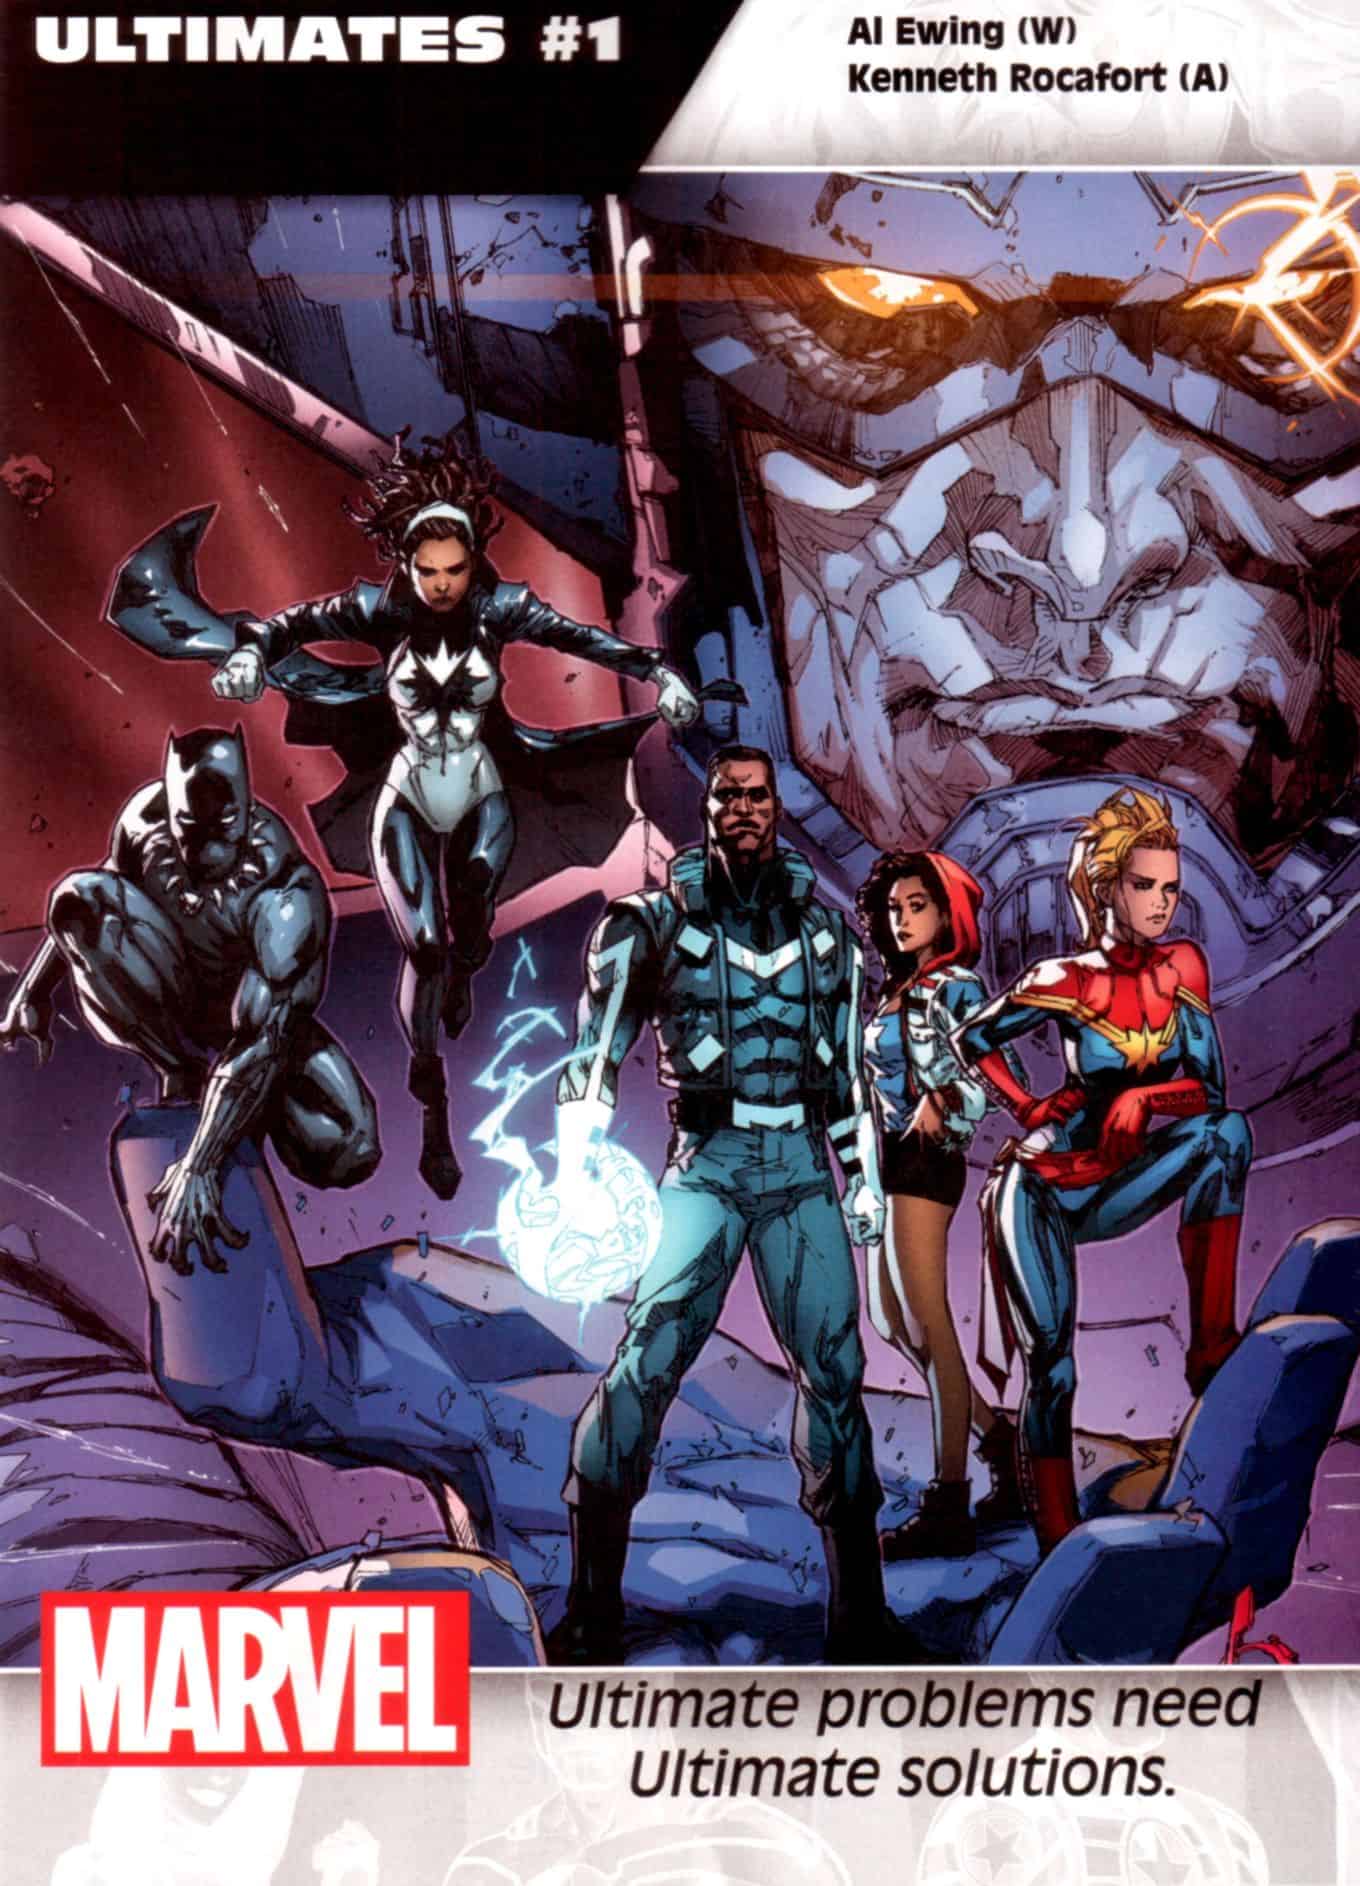 All-New All-Different Marvel Ultimates #1